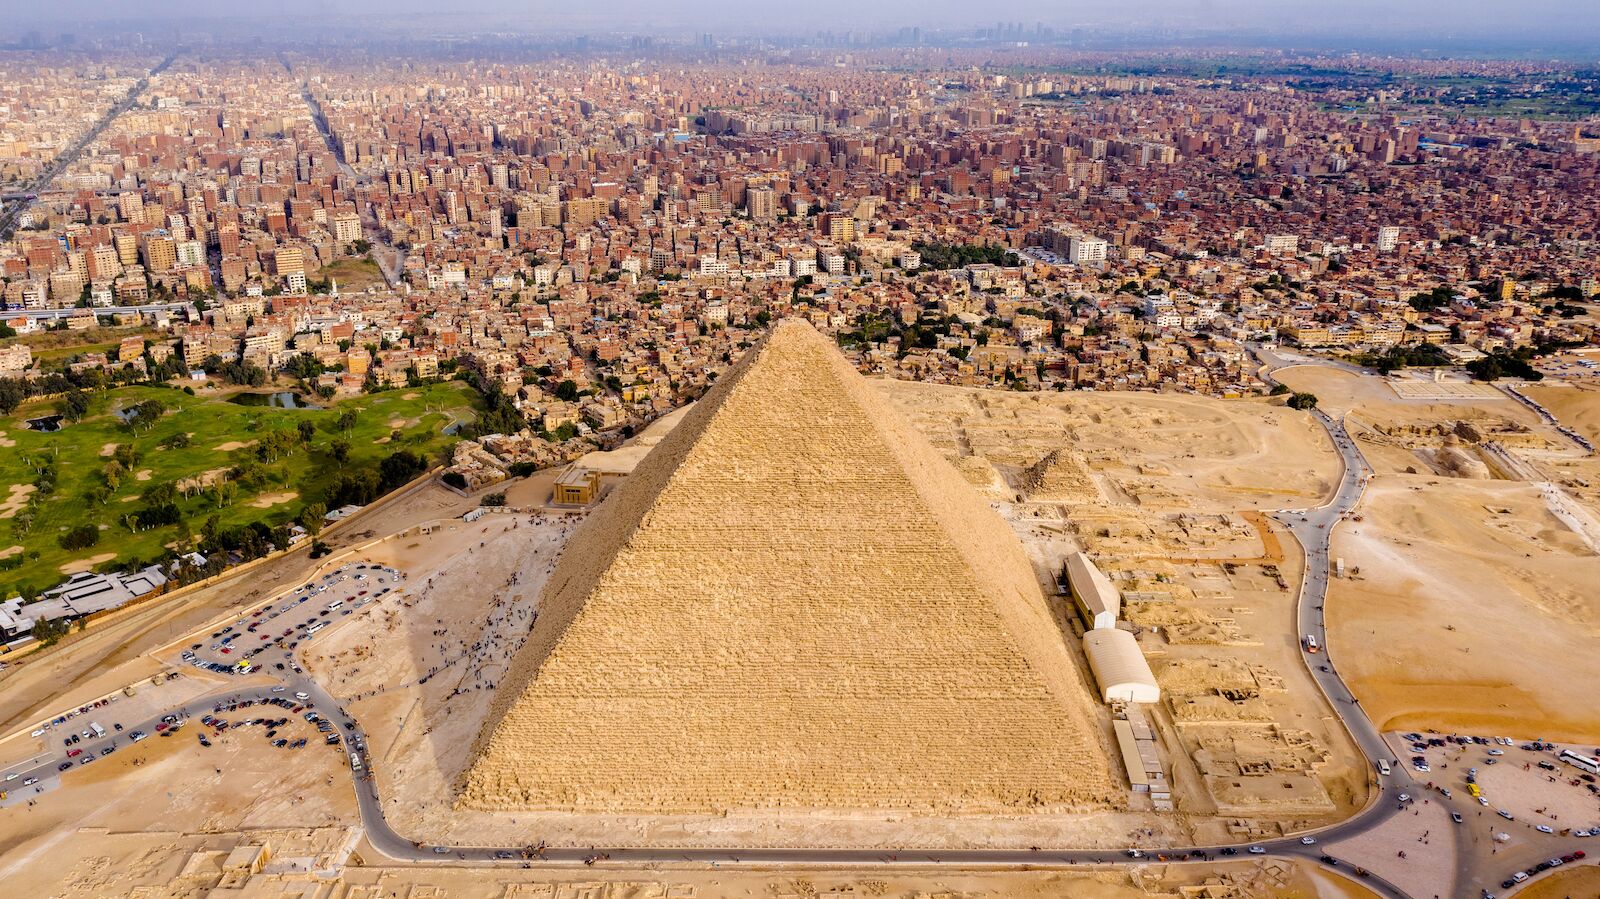 The Pyramid of Khufu is the largest pyramid in Egypt is the subject of several mysteries